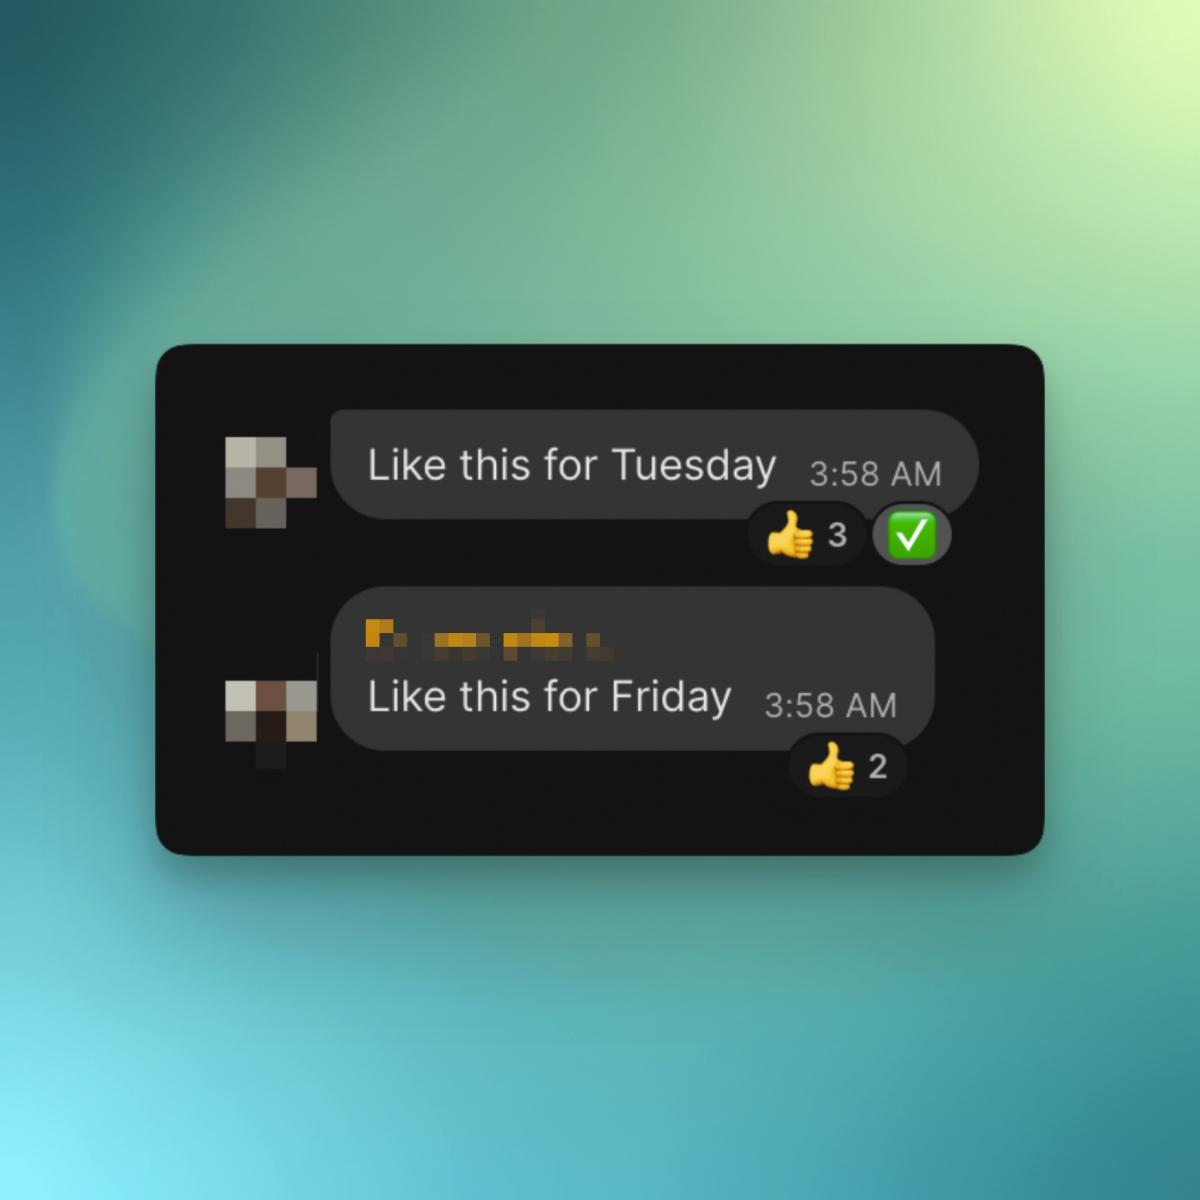 Signal makes it easy to create polls with different reactions for different messages.